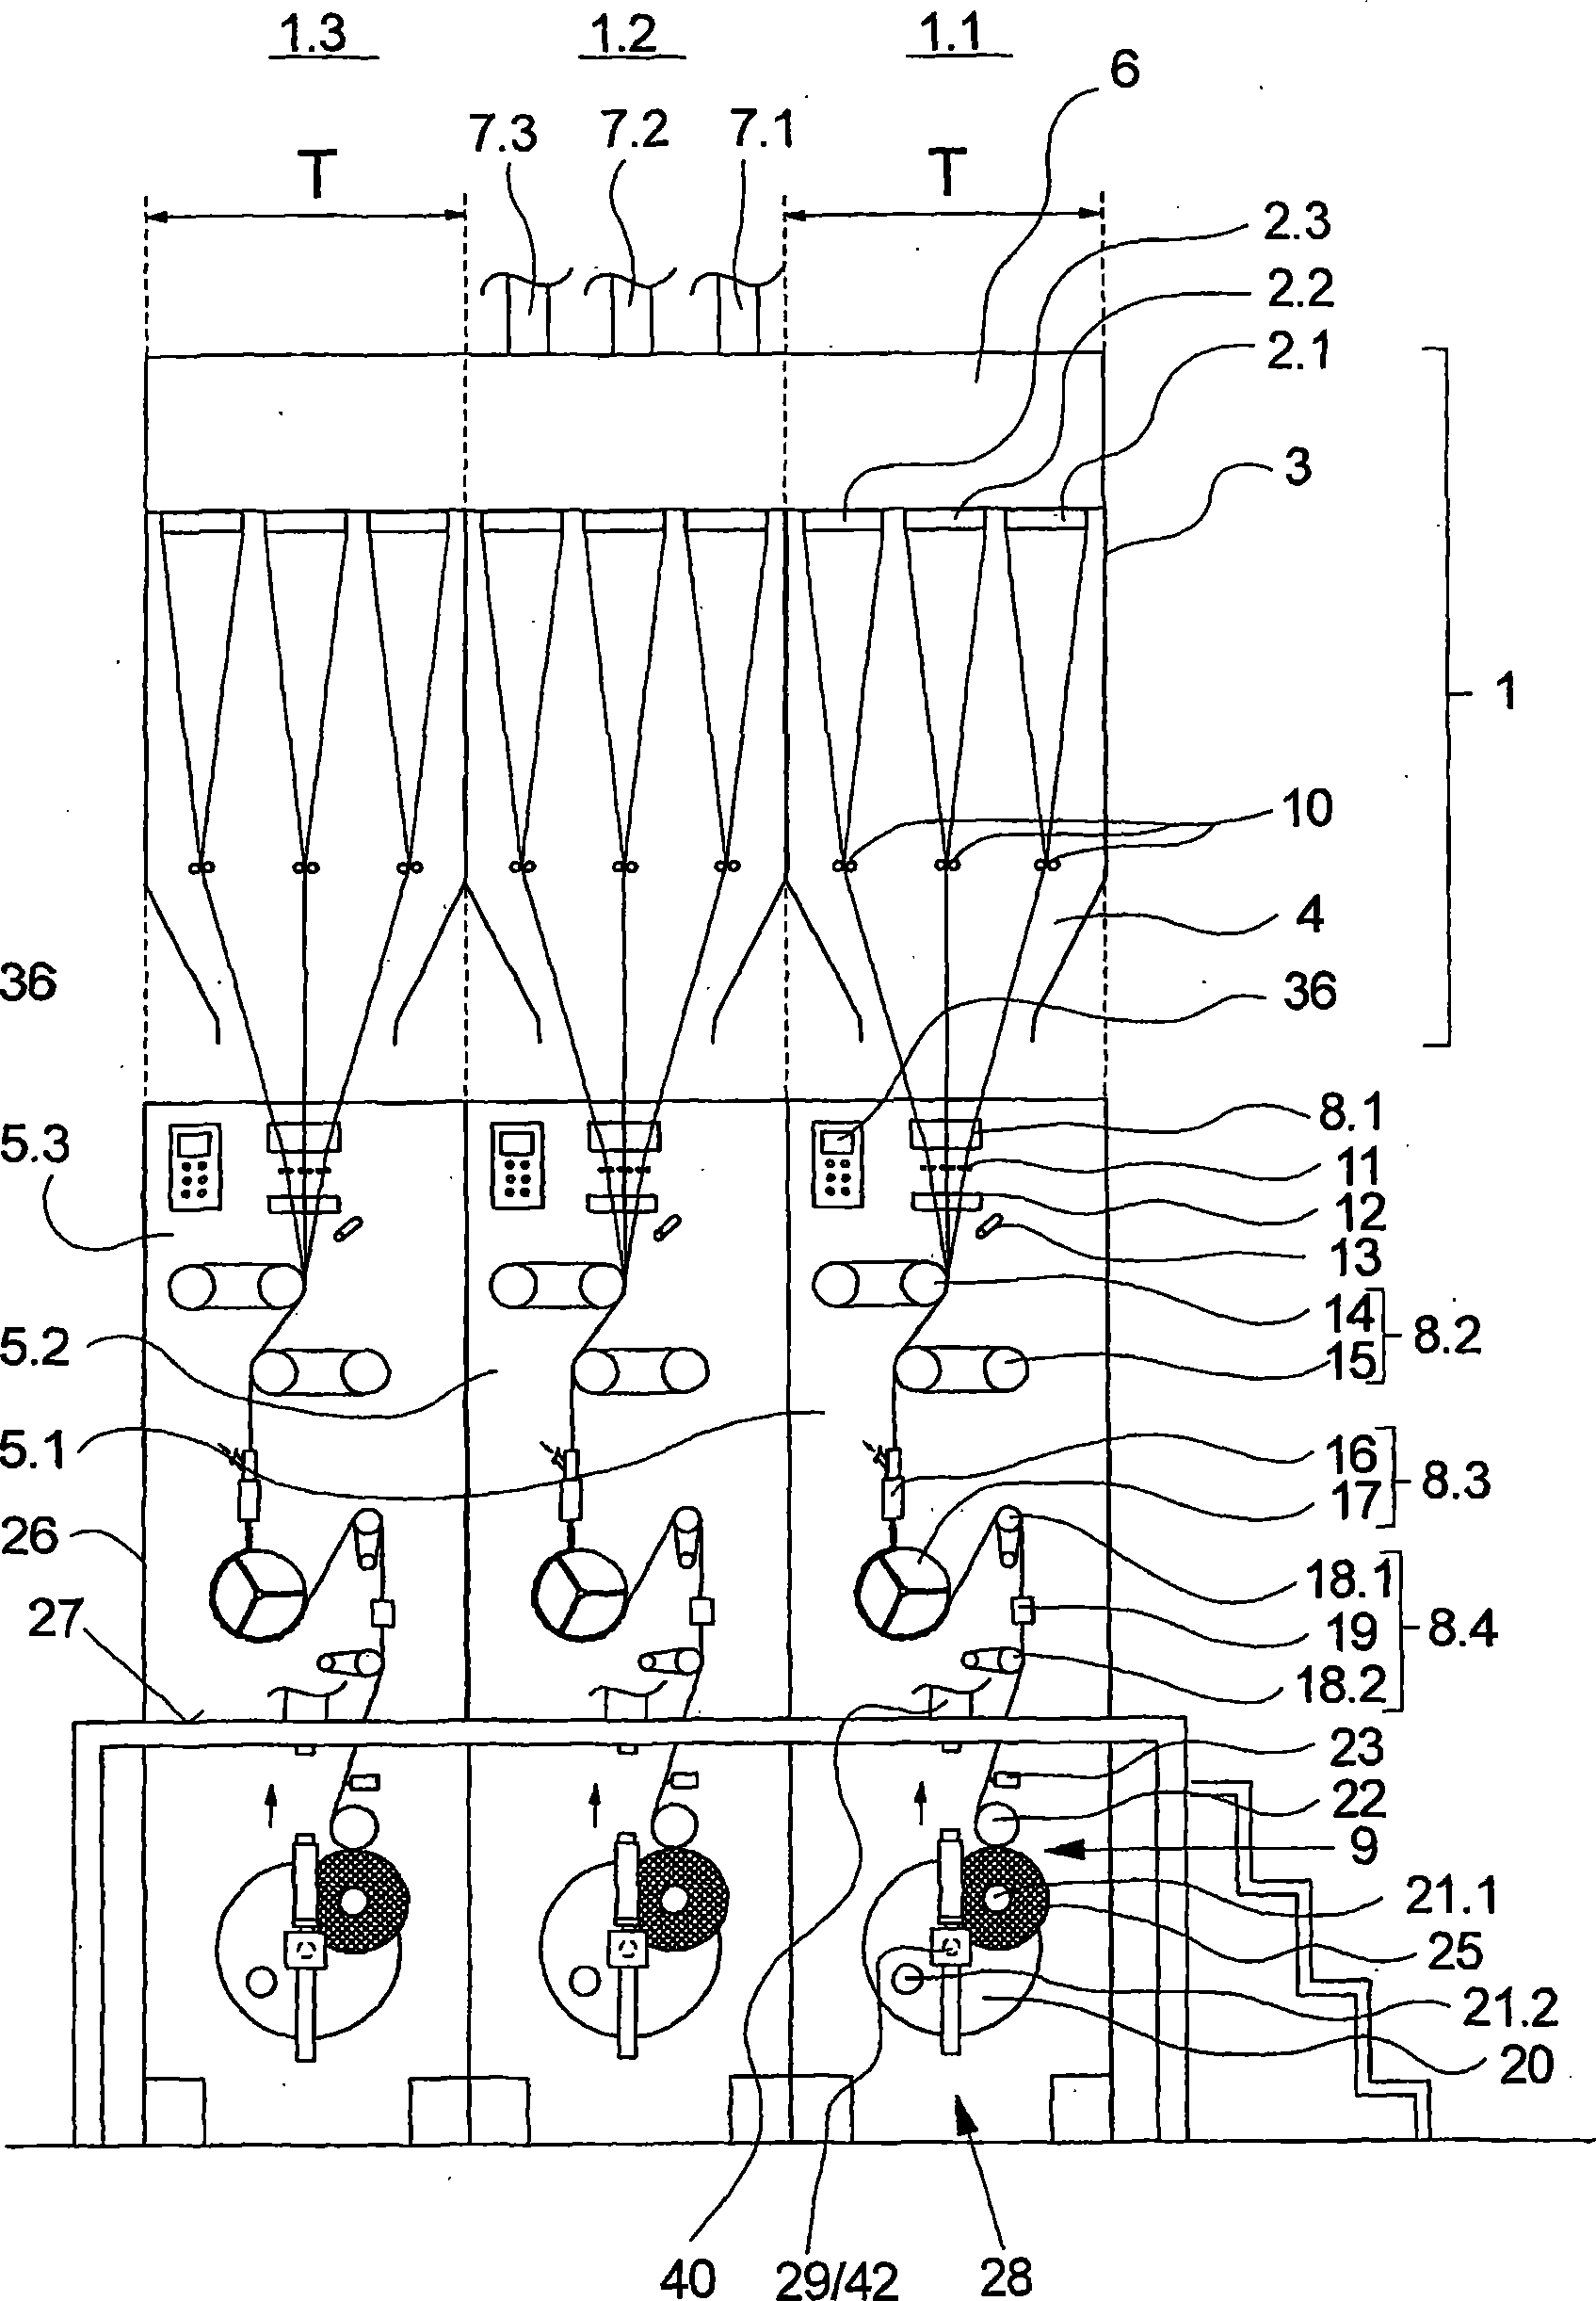 Device for melt spinning, treating and winding synthetic threads